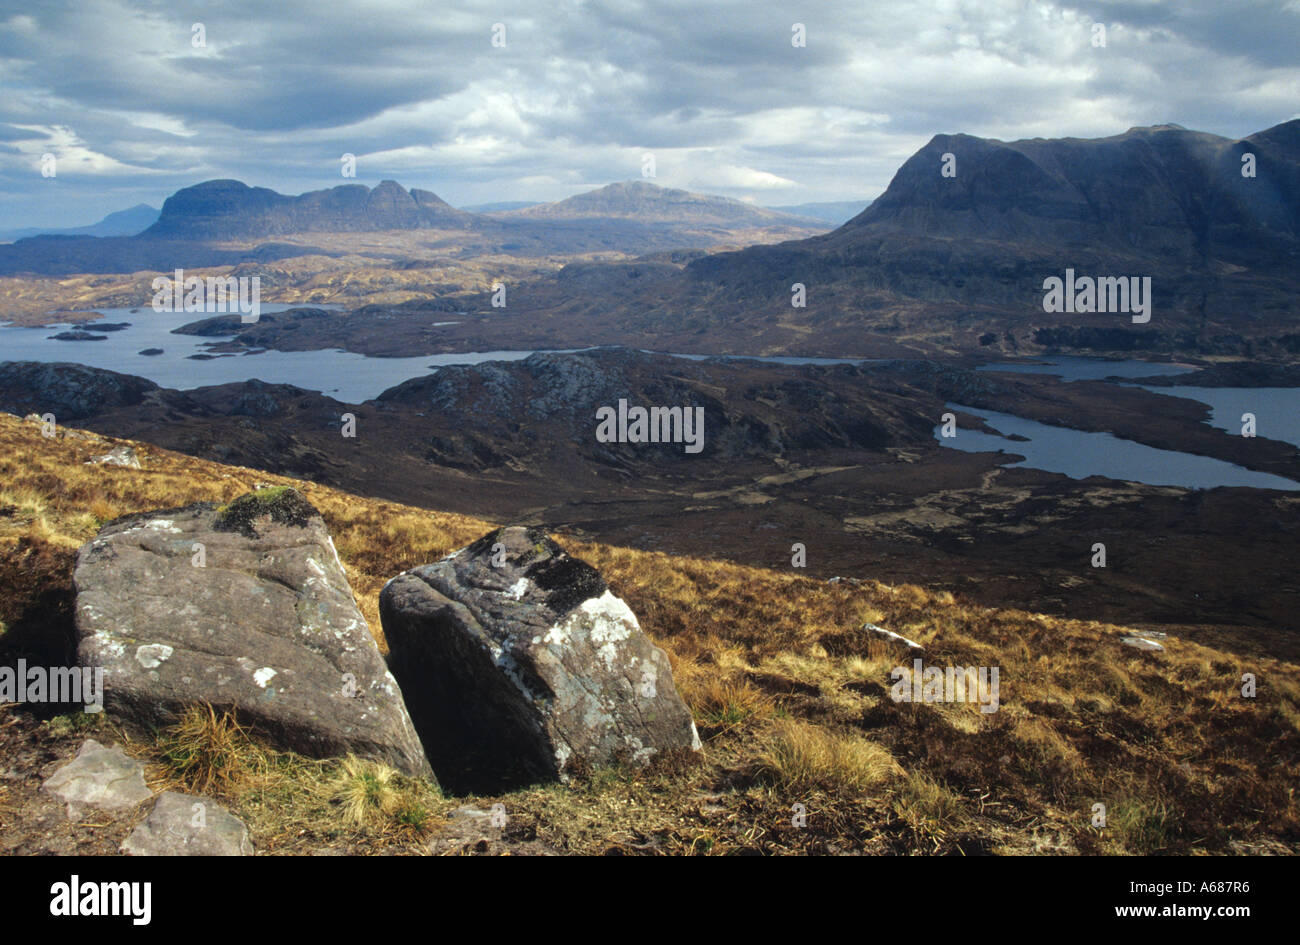 Assynt Coigach North West Scottish Highlands from the top of Stac Pollaidh Mountain Stock Photo